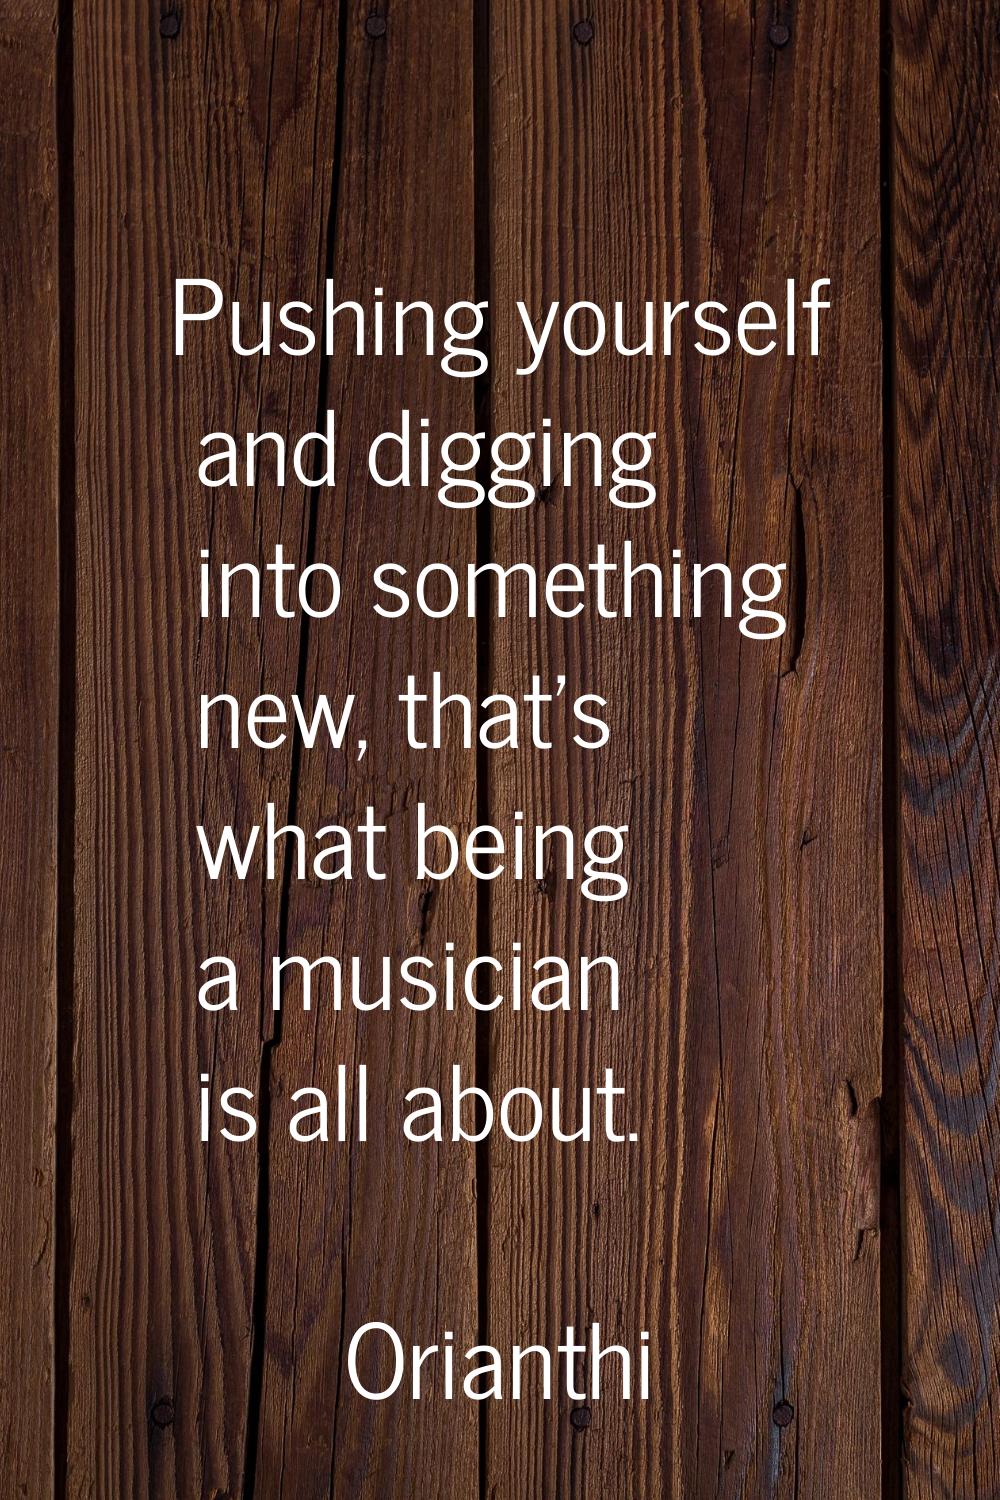 Pushing yourself and digging into something new, that's what being a musician is all about.